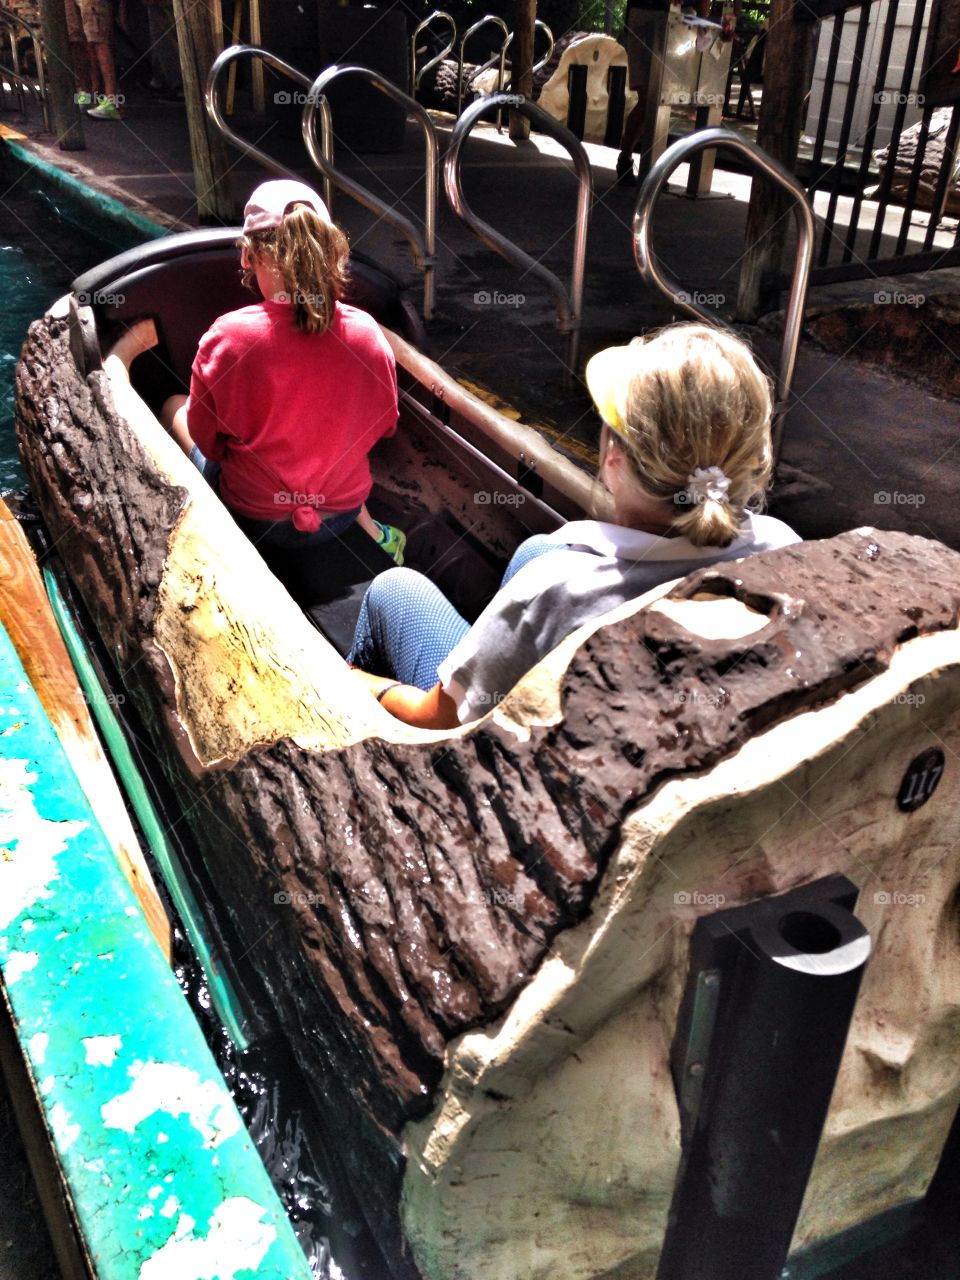 Wooden thrills . Log ride at six flags